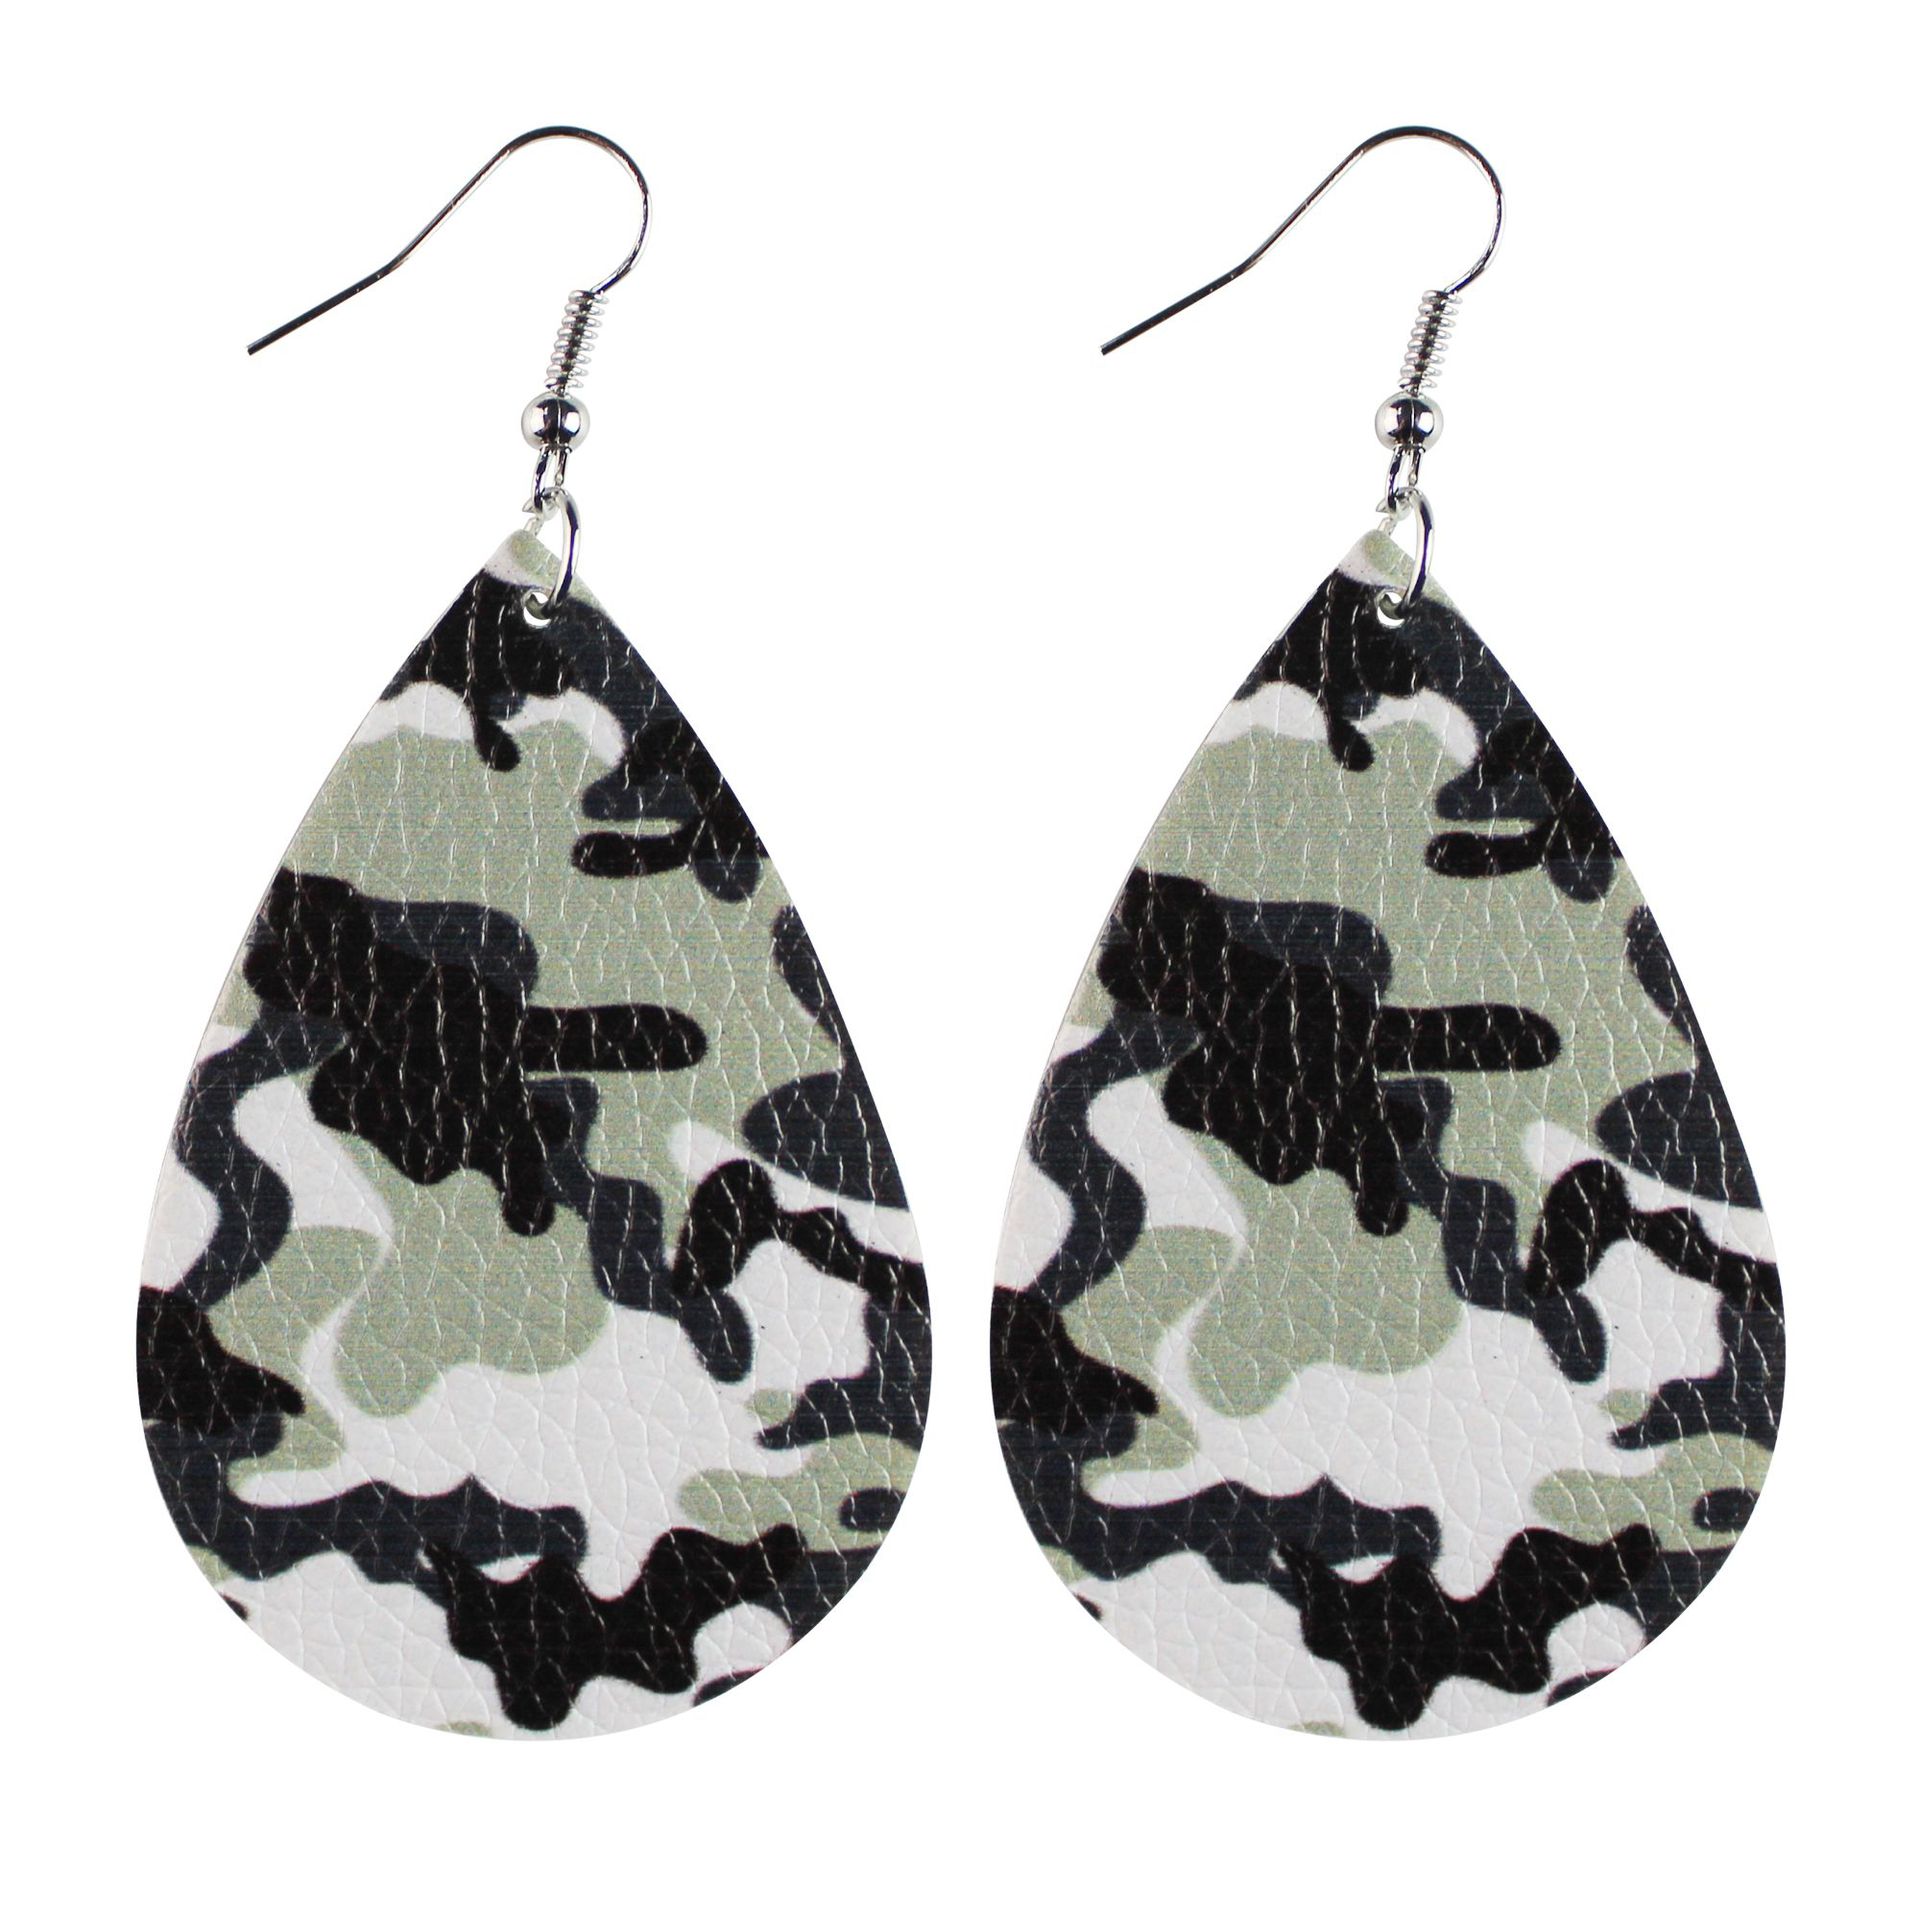 Army Green Camouflage PU Leather Earrings Water Drop Shape Duplex Printing Exclusive for Cross-Border Amazon